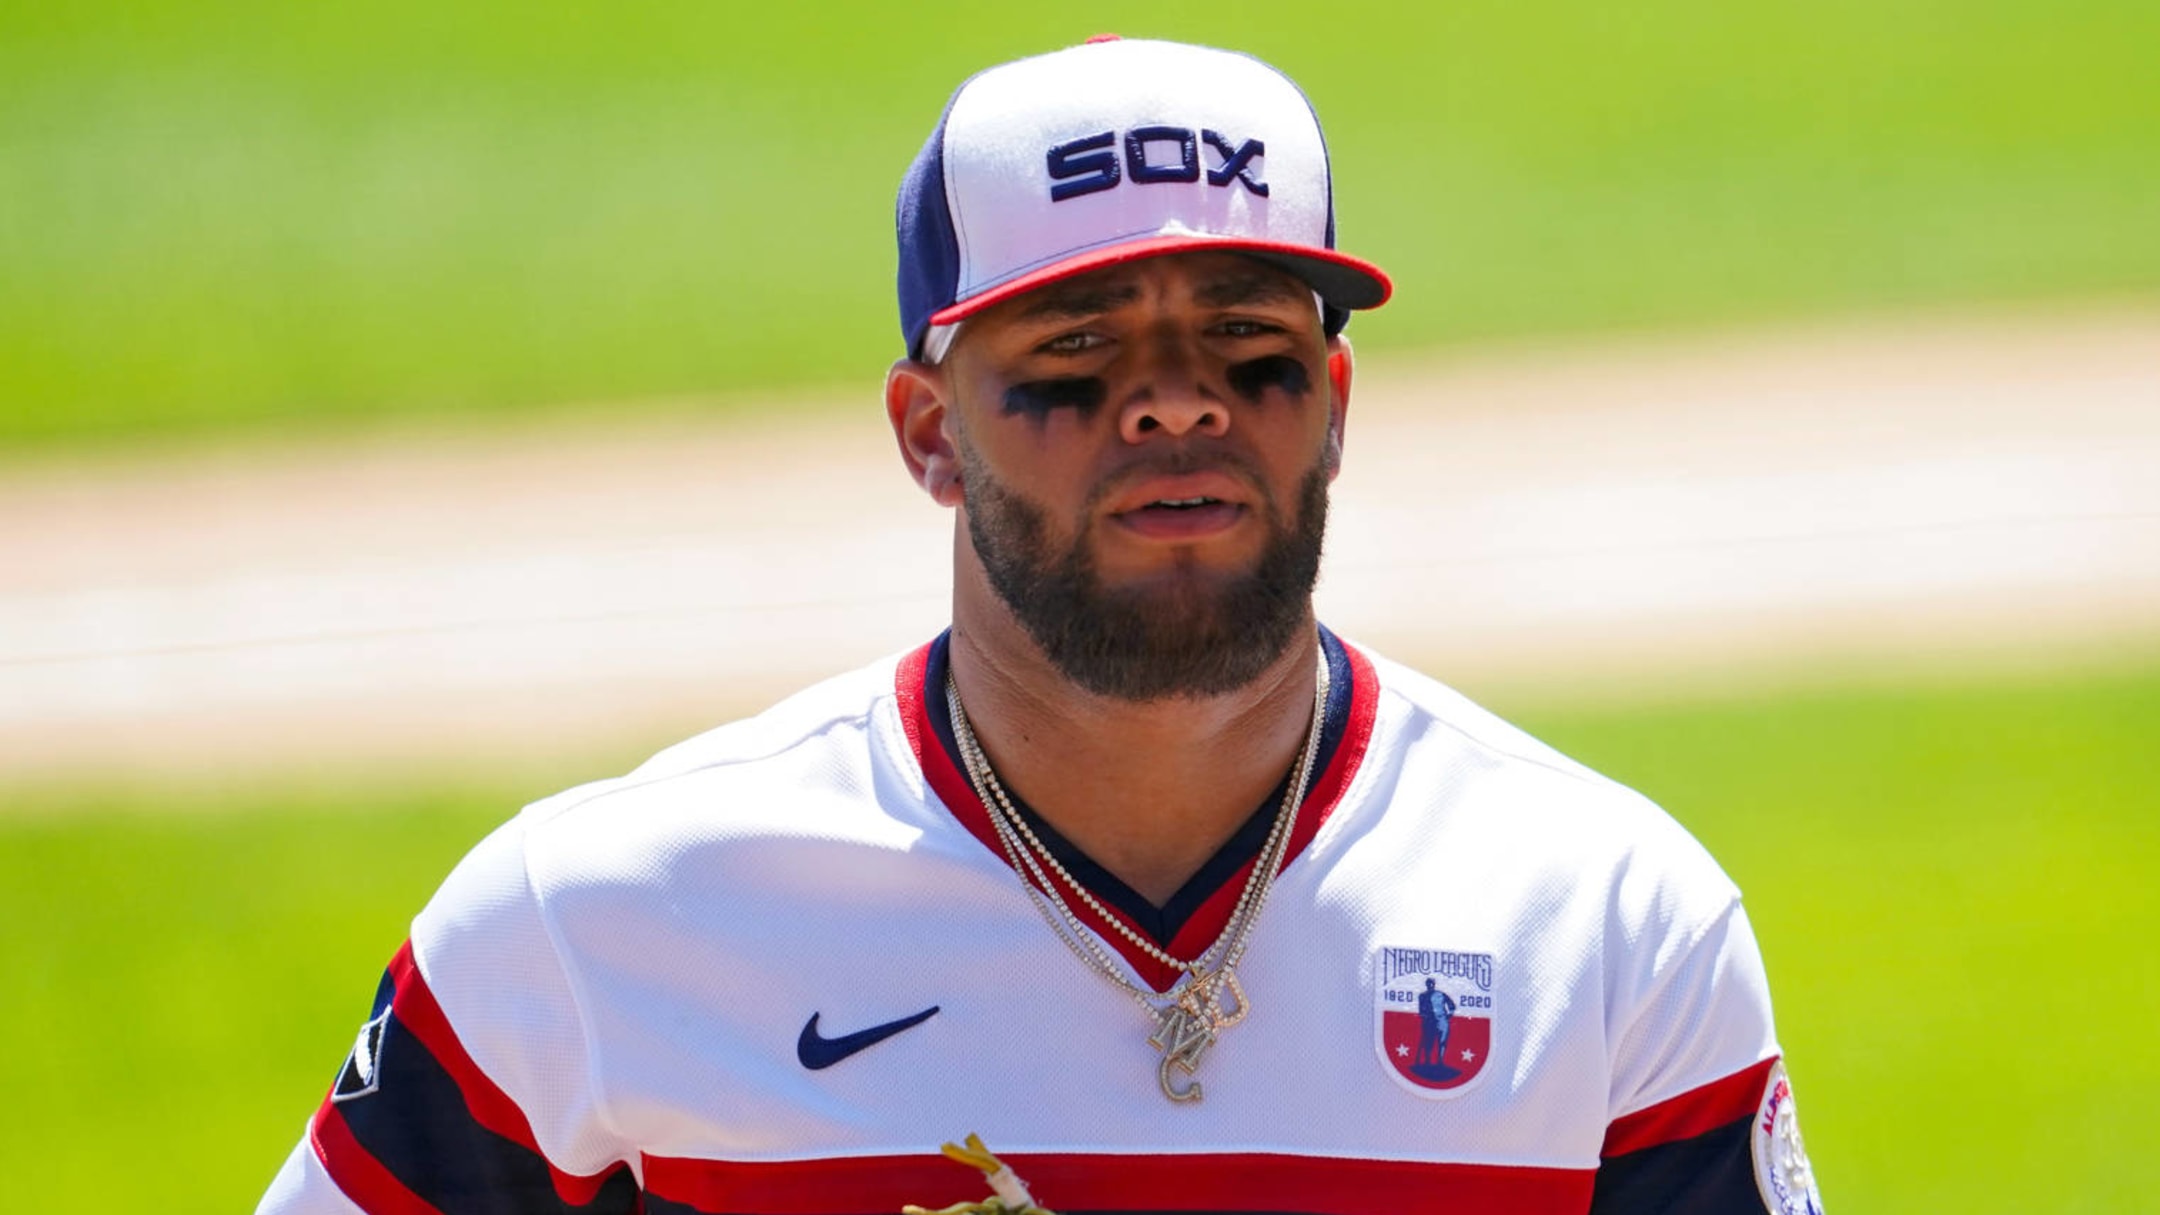 After attention-generating debut, Yoan Moncada showing poise in big-league  journey